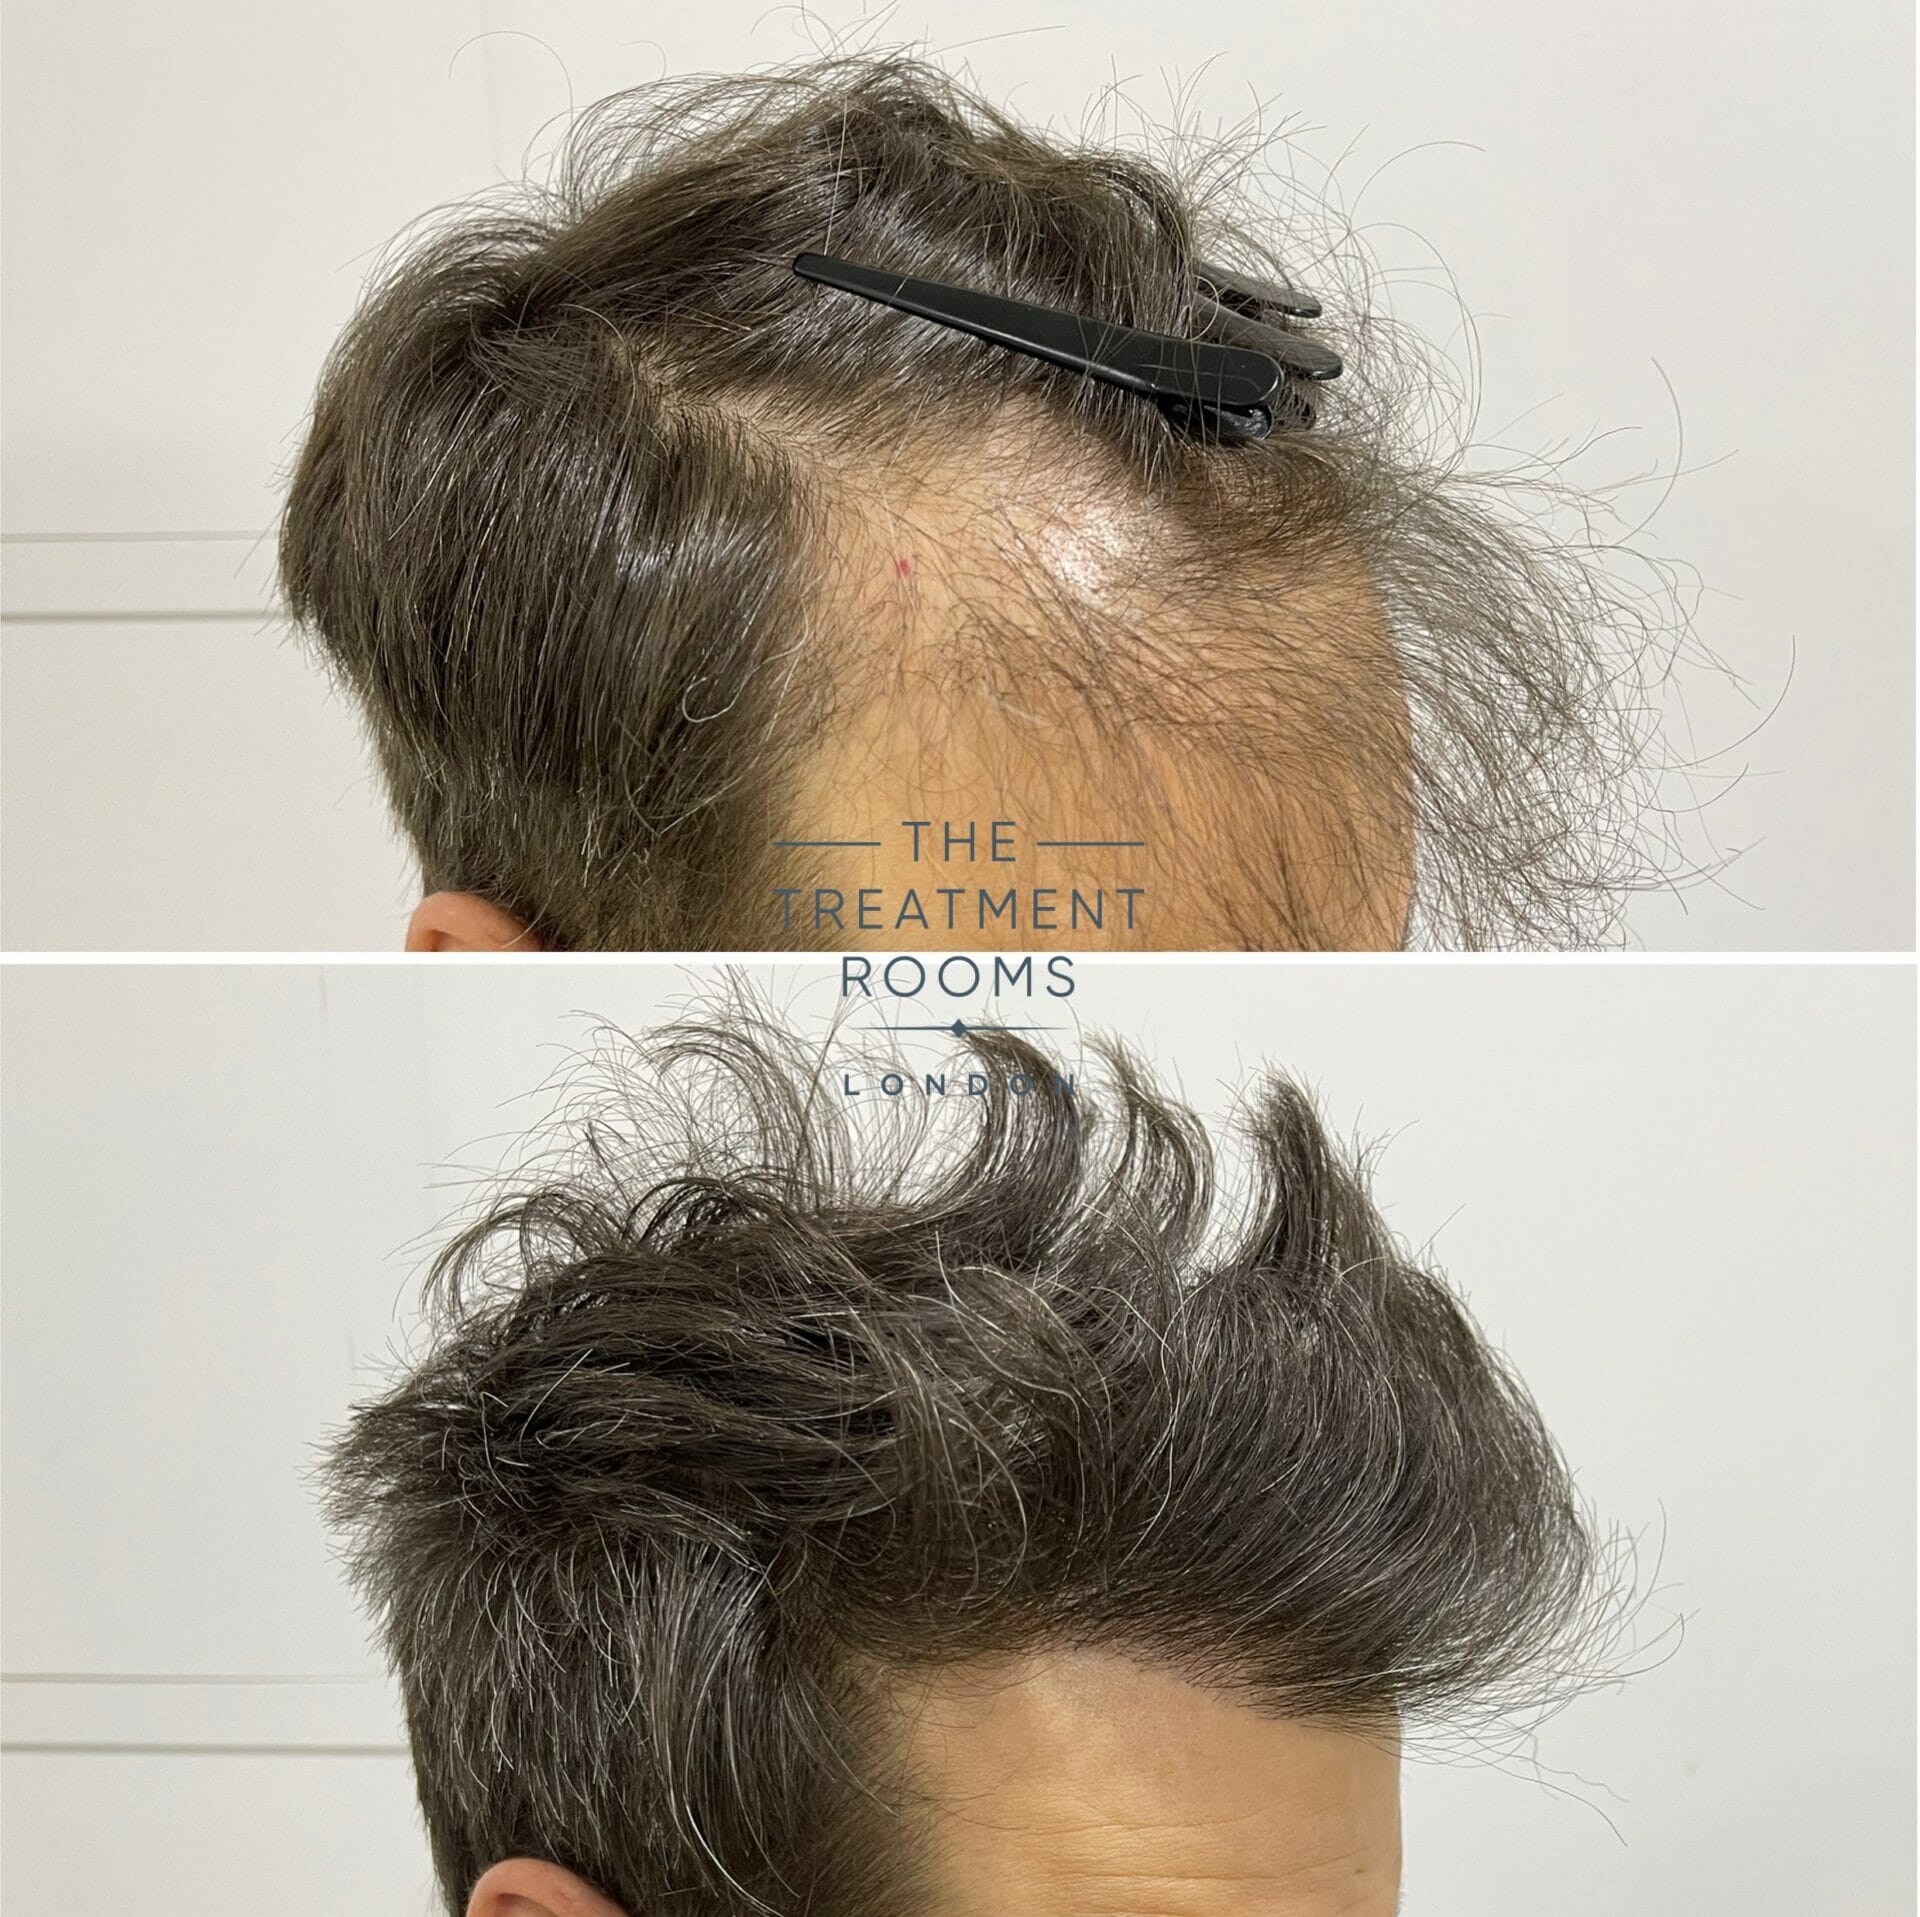 cold weather hair transplant